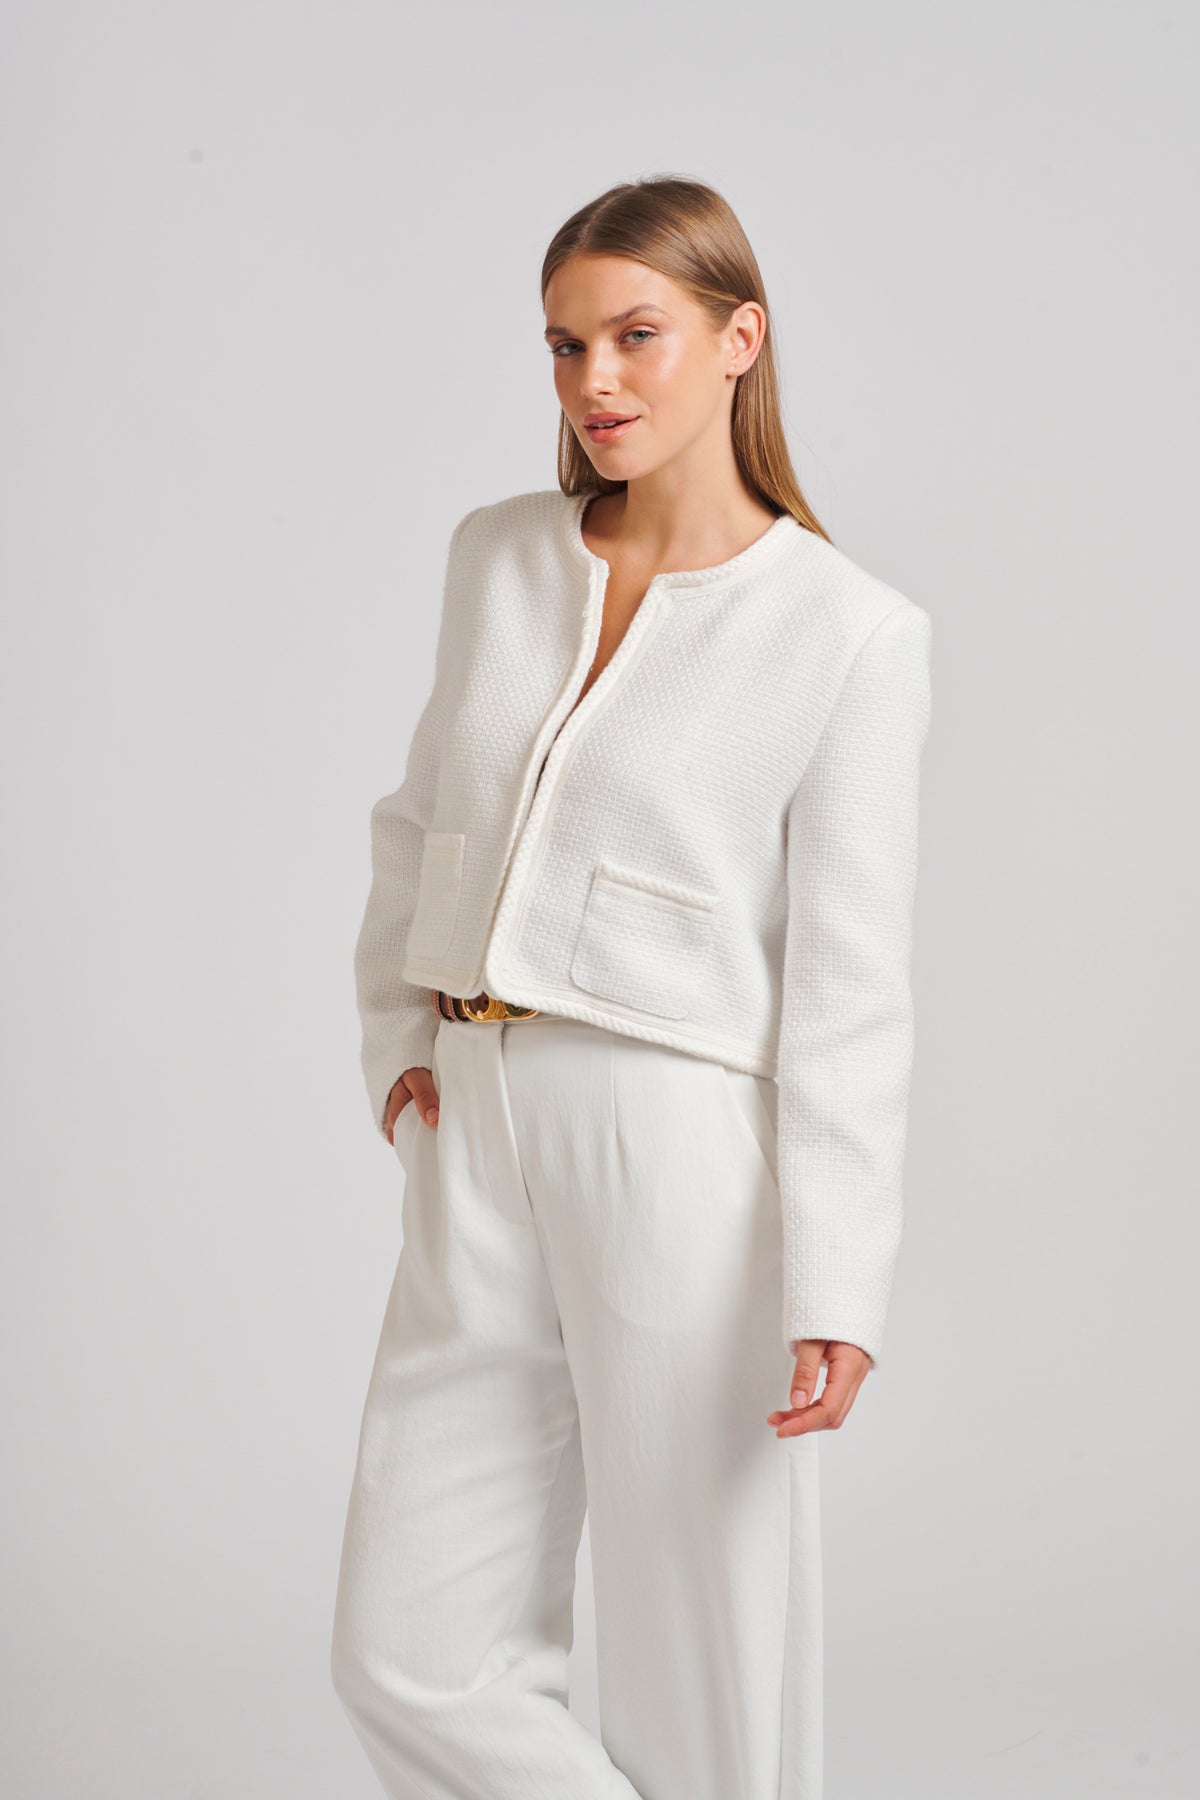 The Audrey Cropped Boucle Jacket